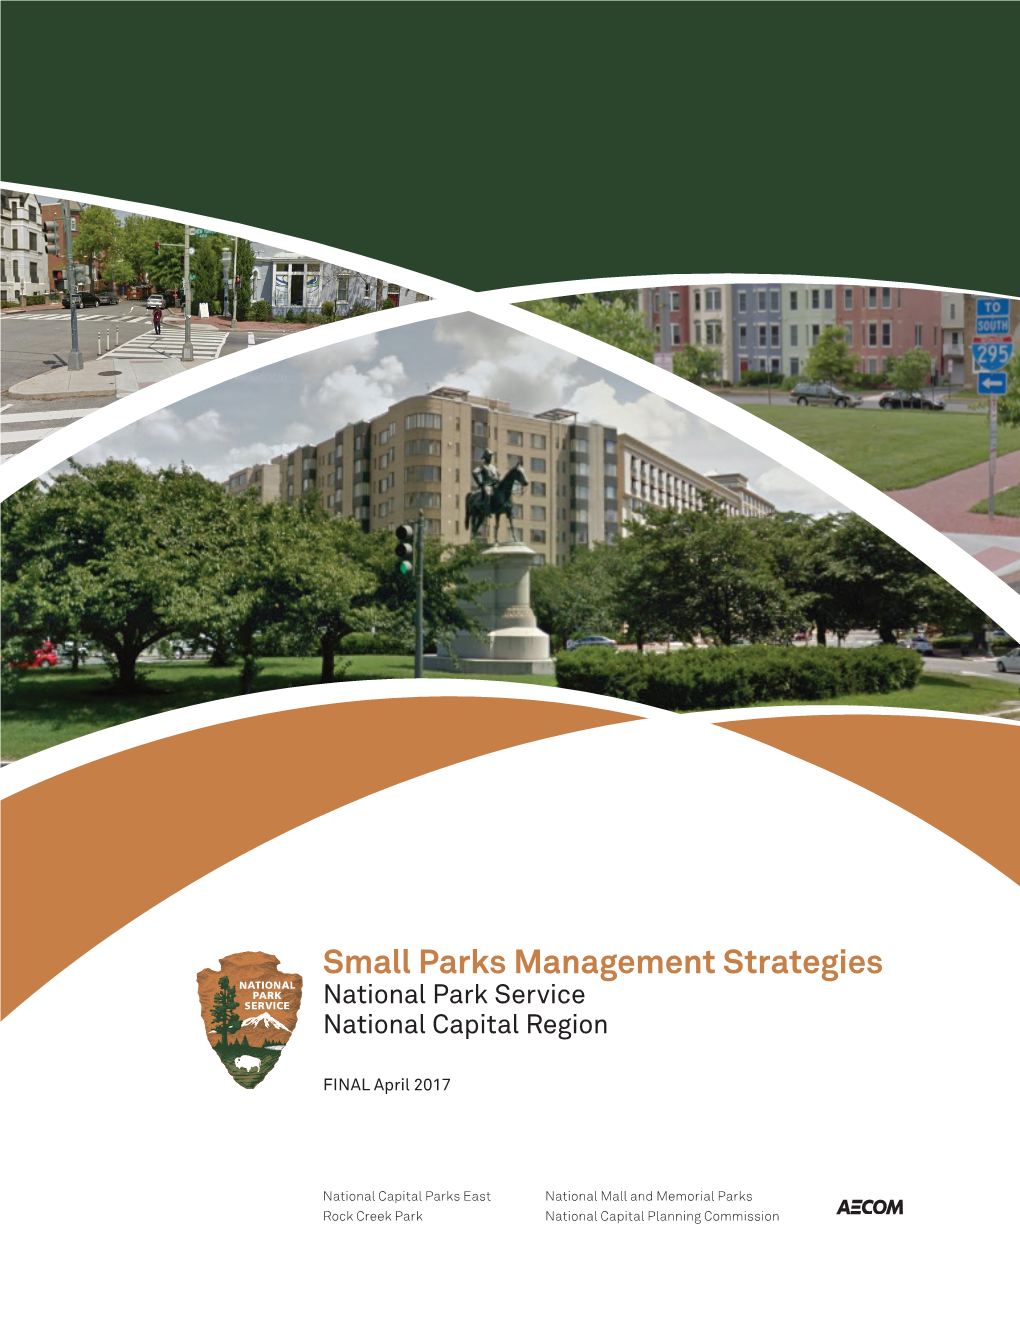 Small Parks Management Strategies National Park Service National Capital Region